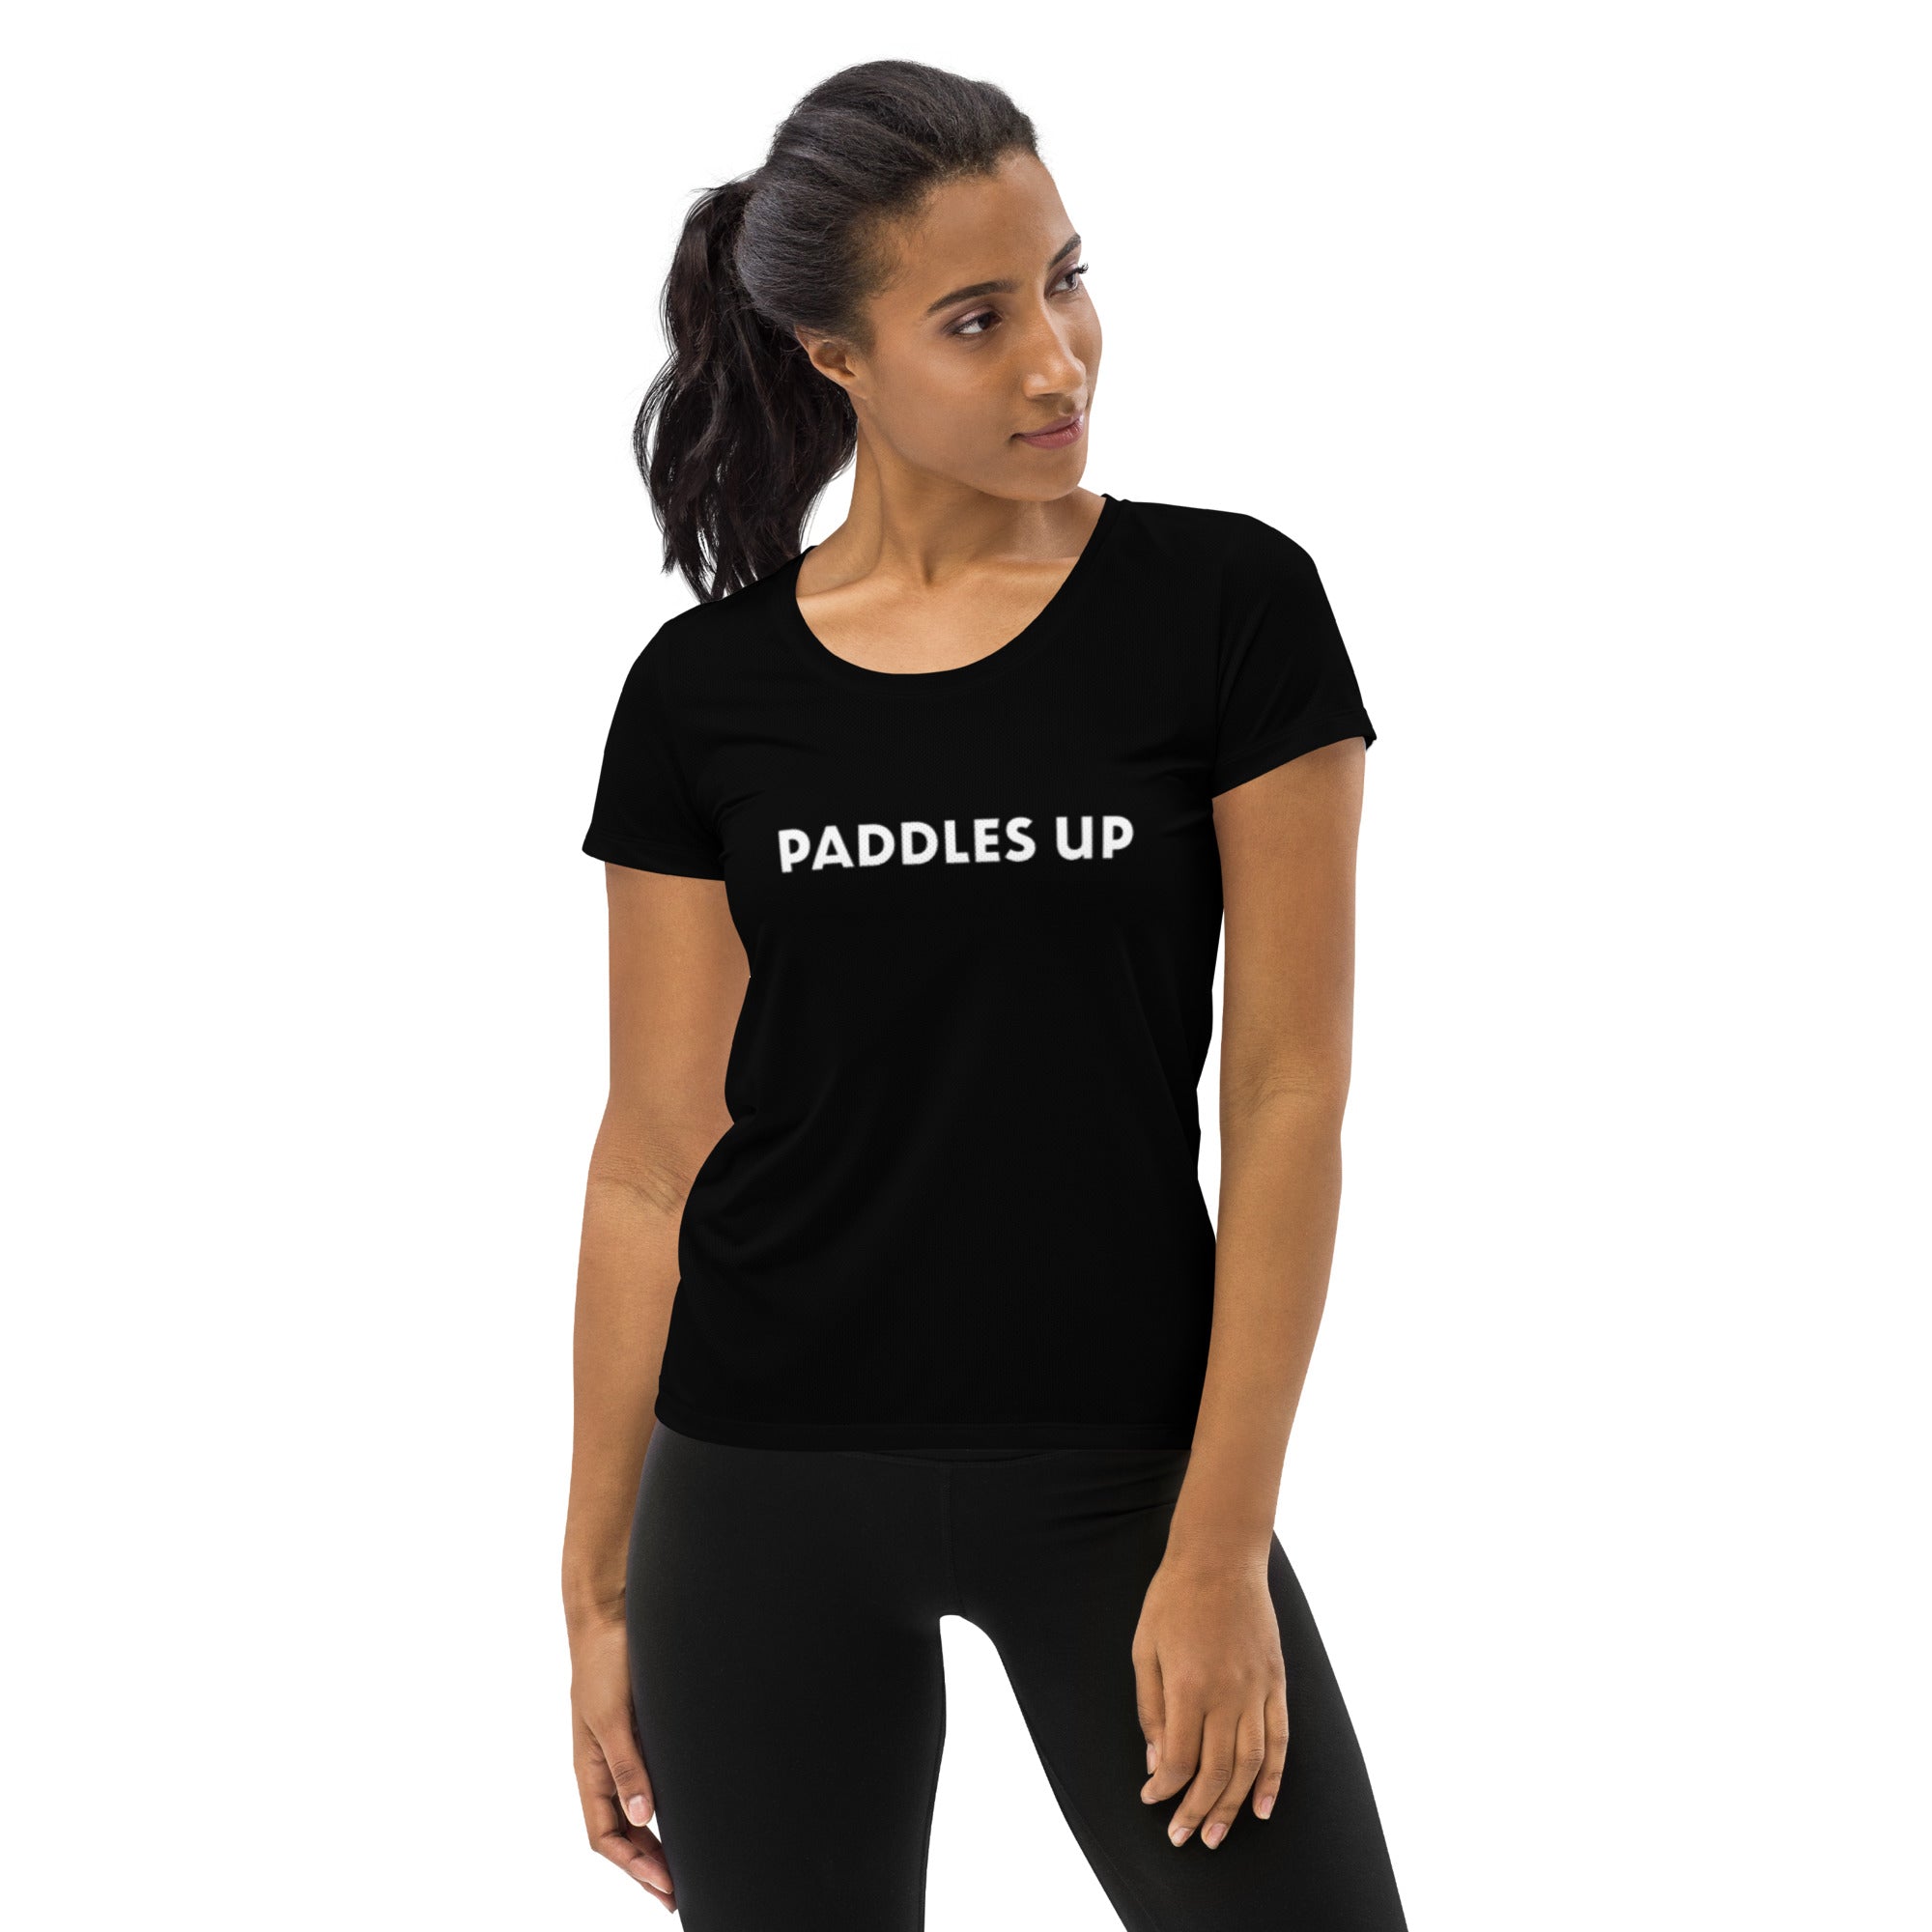 Paddle's Up Women's Athletic T-Shirt – Paddles DB